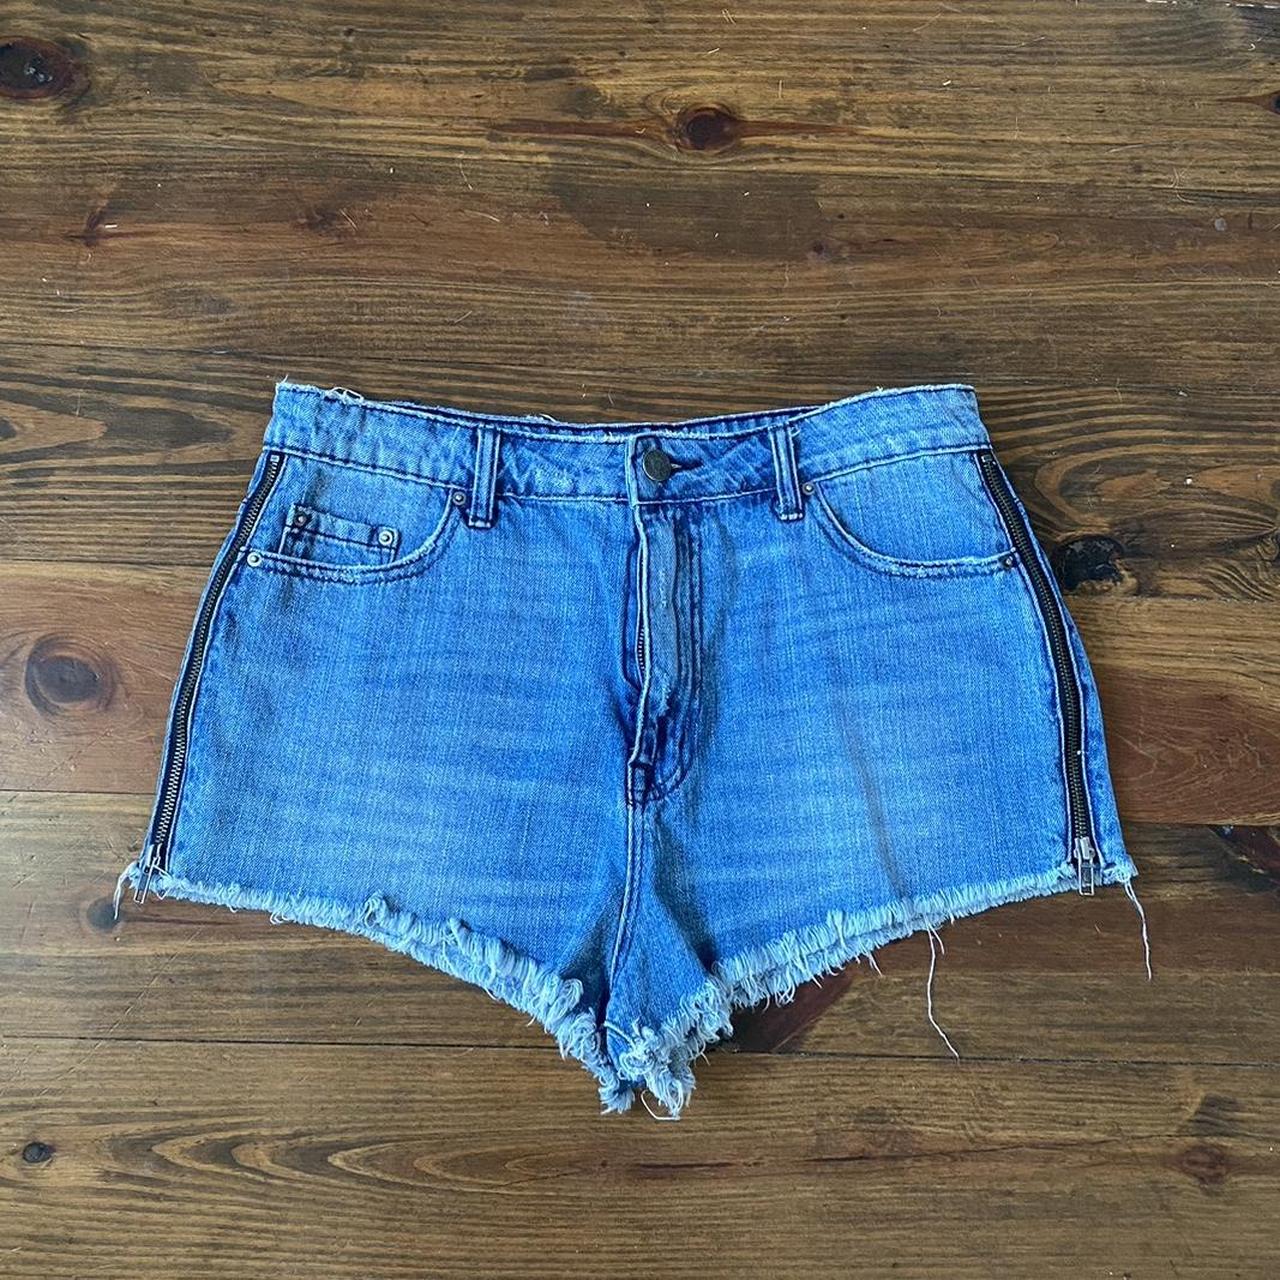 Suns Out Buns Out Low Rise Denim Mini Booty Shorts Cheeky Jean